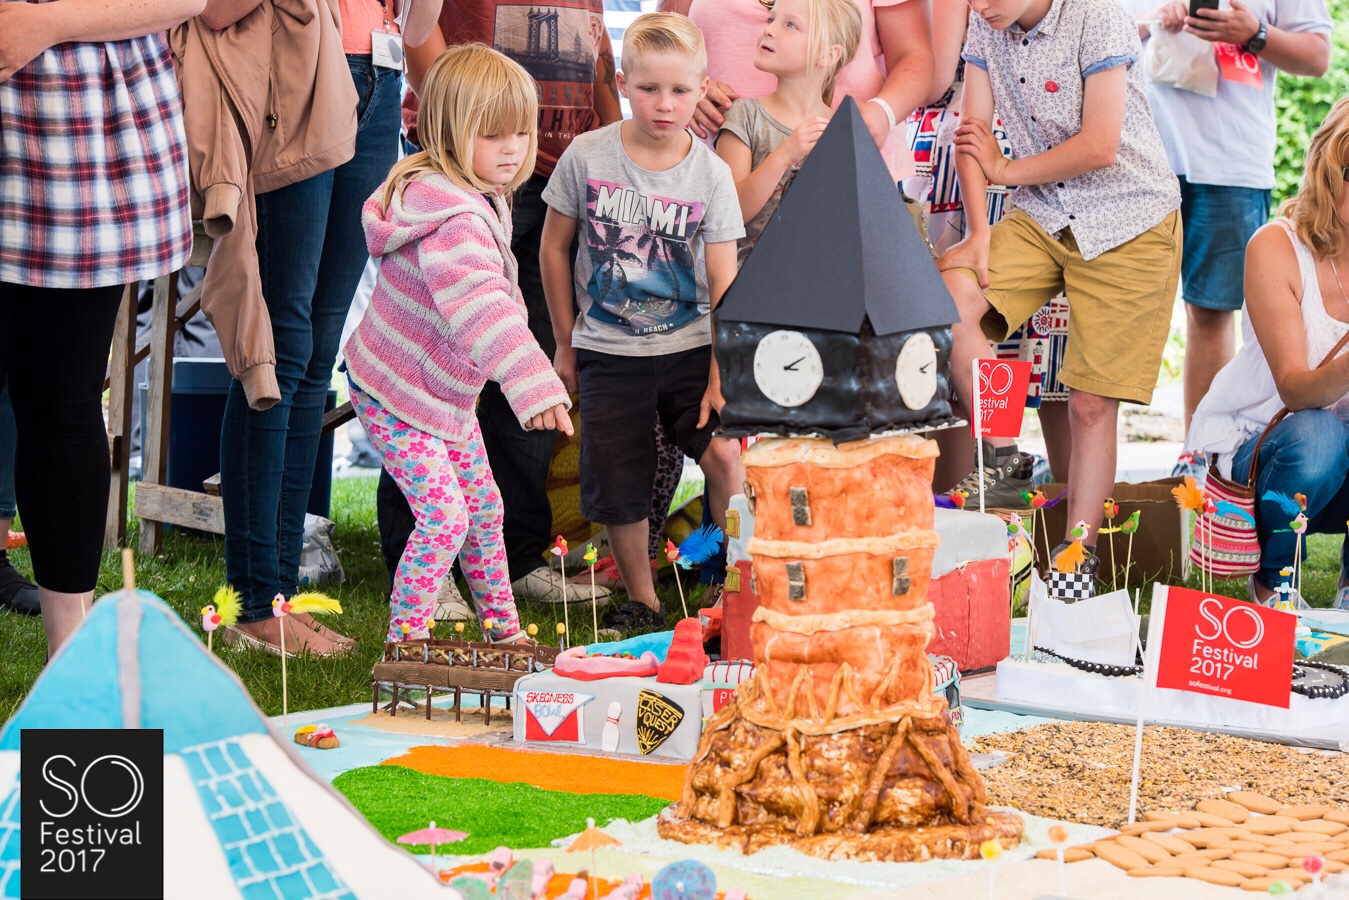 THE search is on for Boro’s best bakers to create cake sculptures of the town’s landmarks